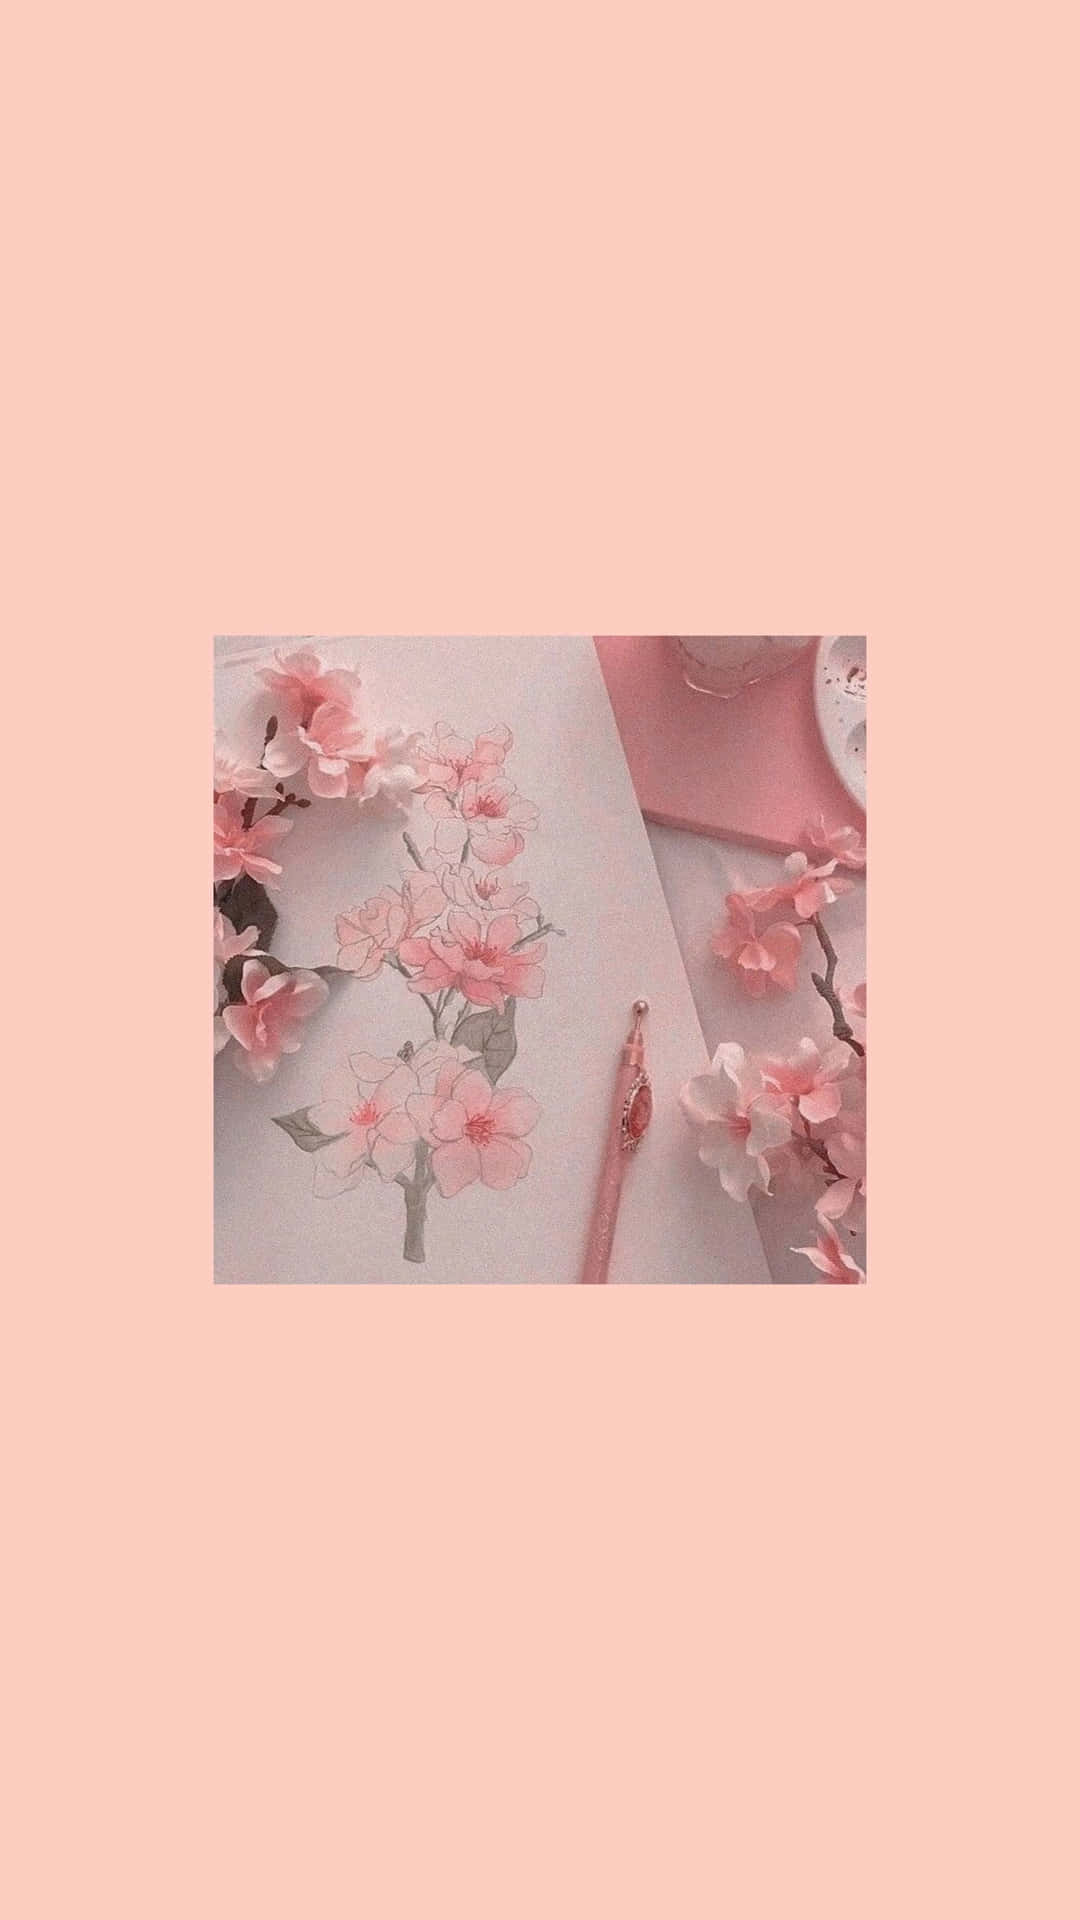 200+] Pastel Pink Aesthetic Pictures 